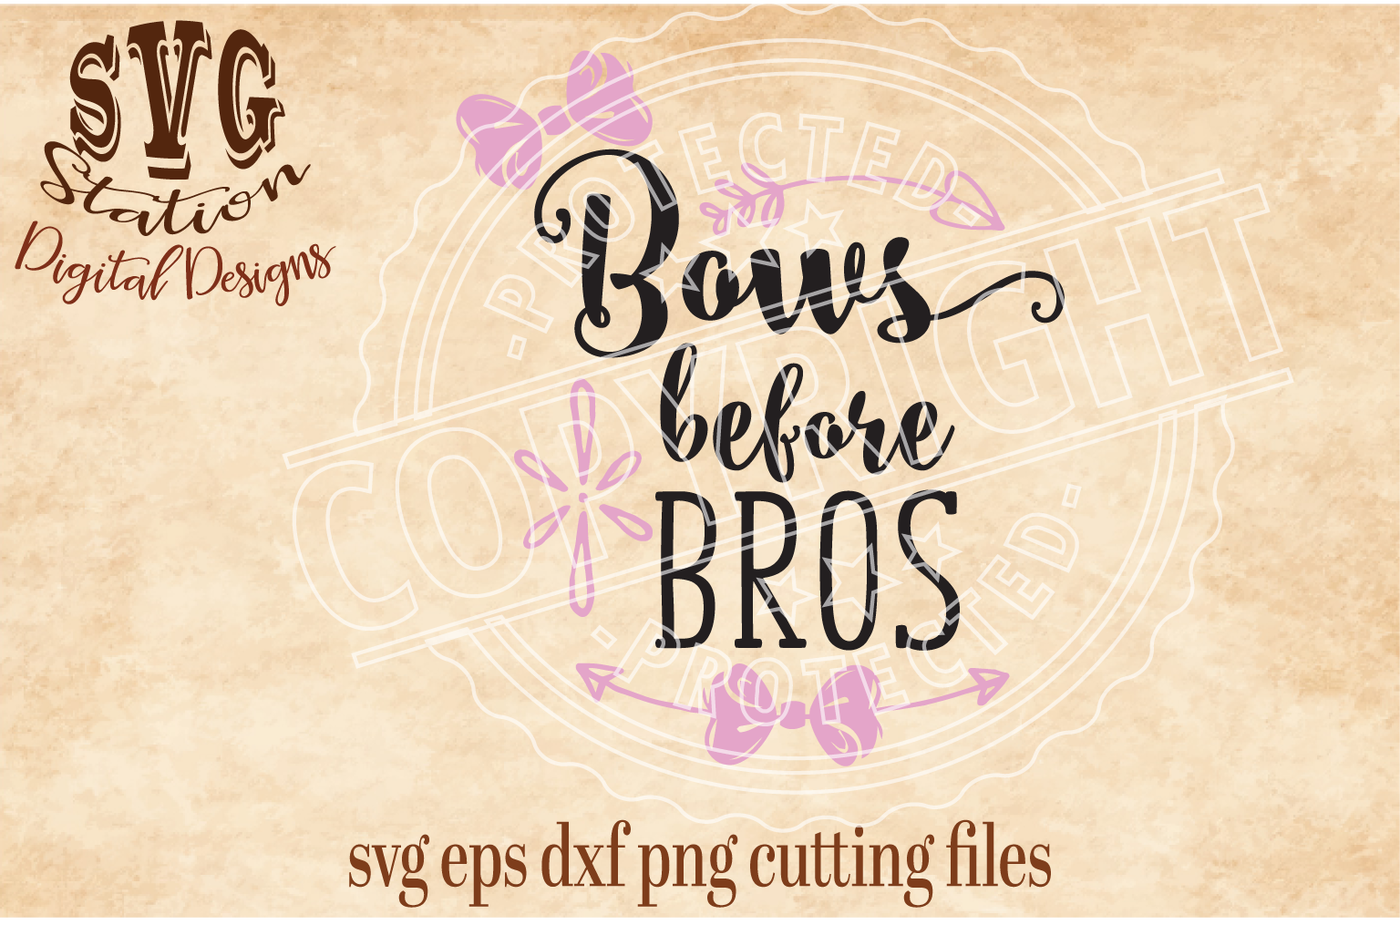 ori 54697 581811d6339552105ca159219d1383461cfcb501 bows before bros svg dxf png eps cutting file silhouette cricut